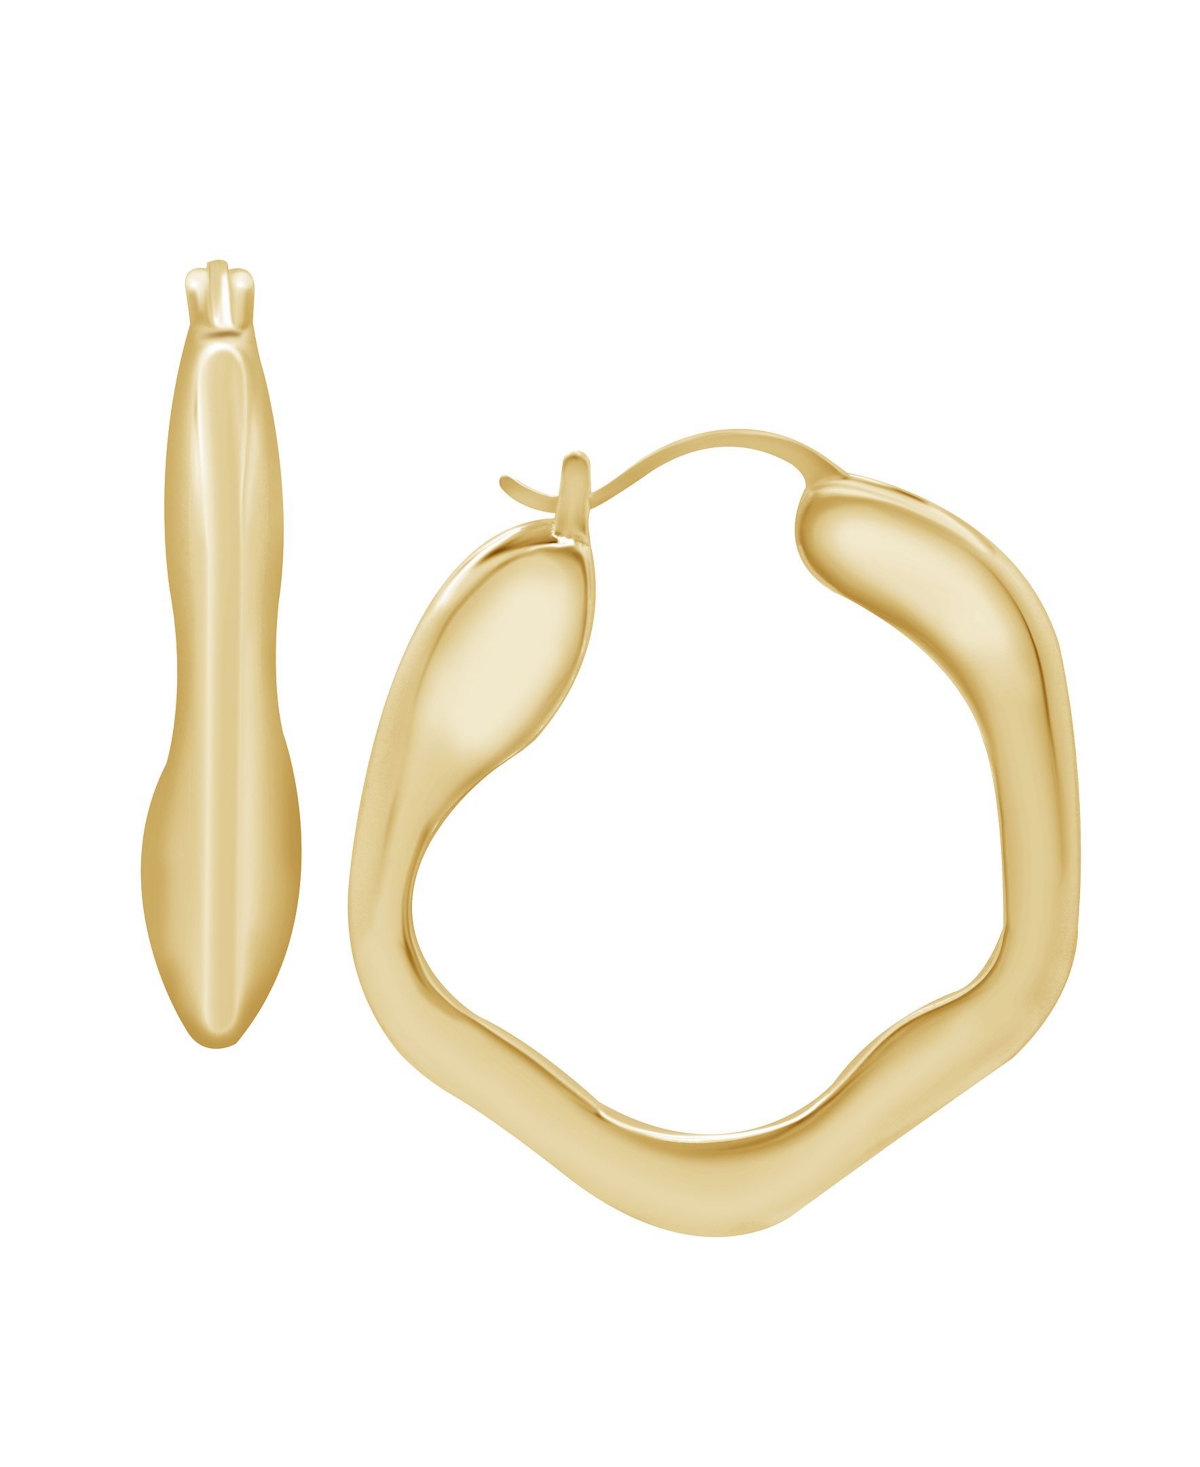 Gold or Silver Plated Wave Look Click Top Earrings - Gold-Plated